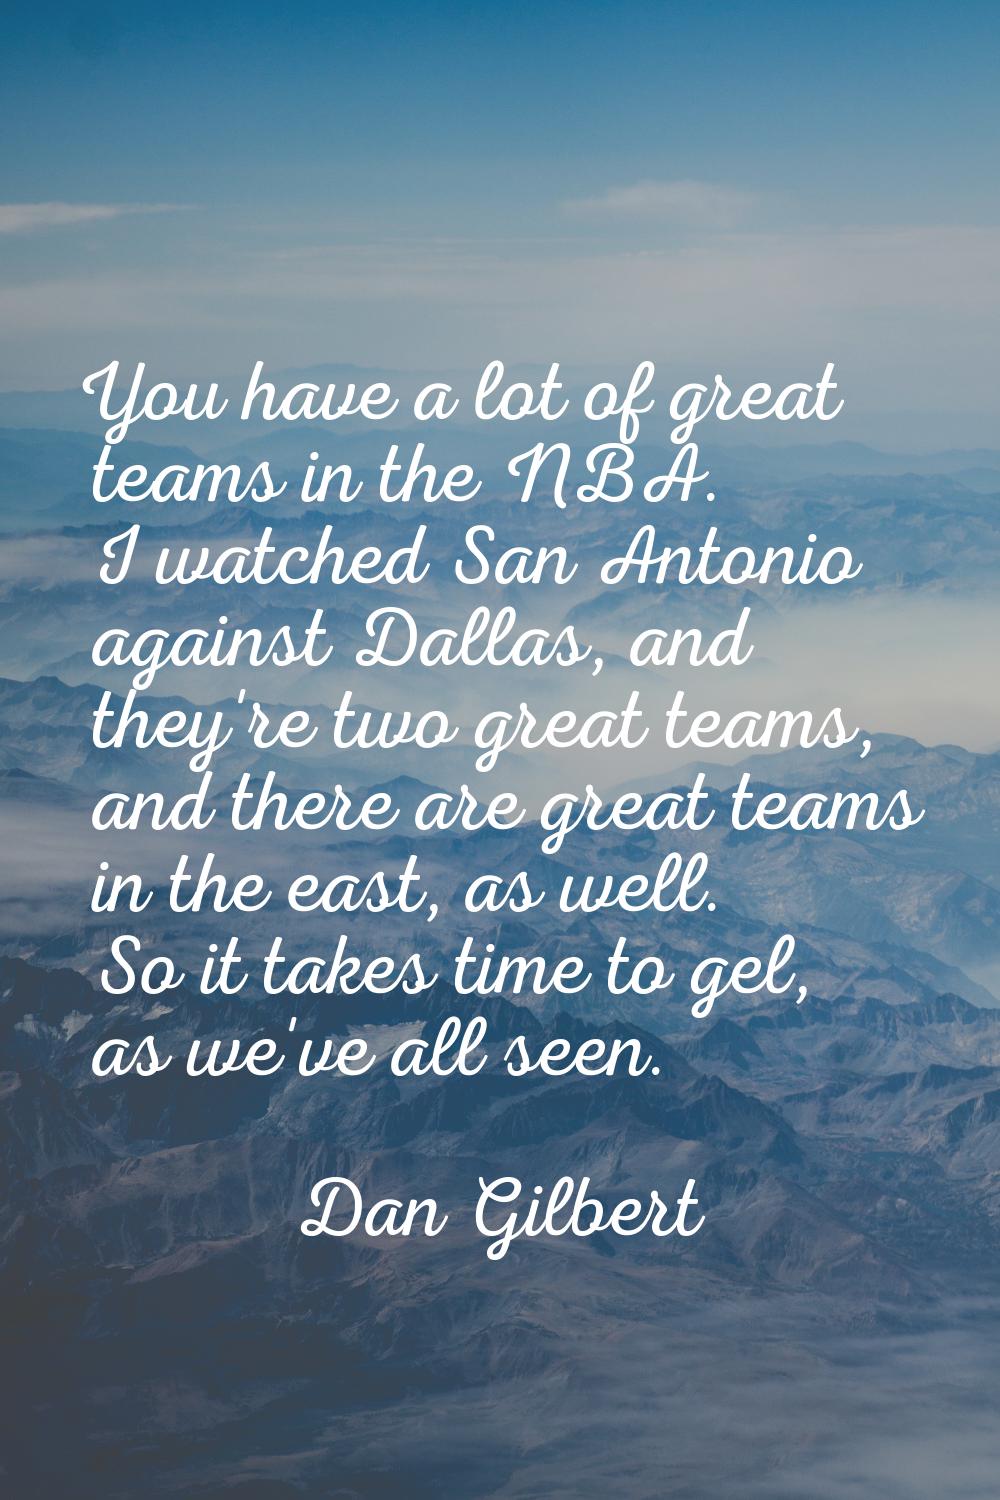 You have a lot of great teams in the NBA. I watched San Antonio against Dallas, and they're two gre